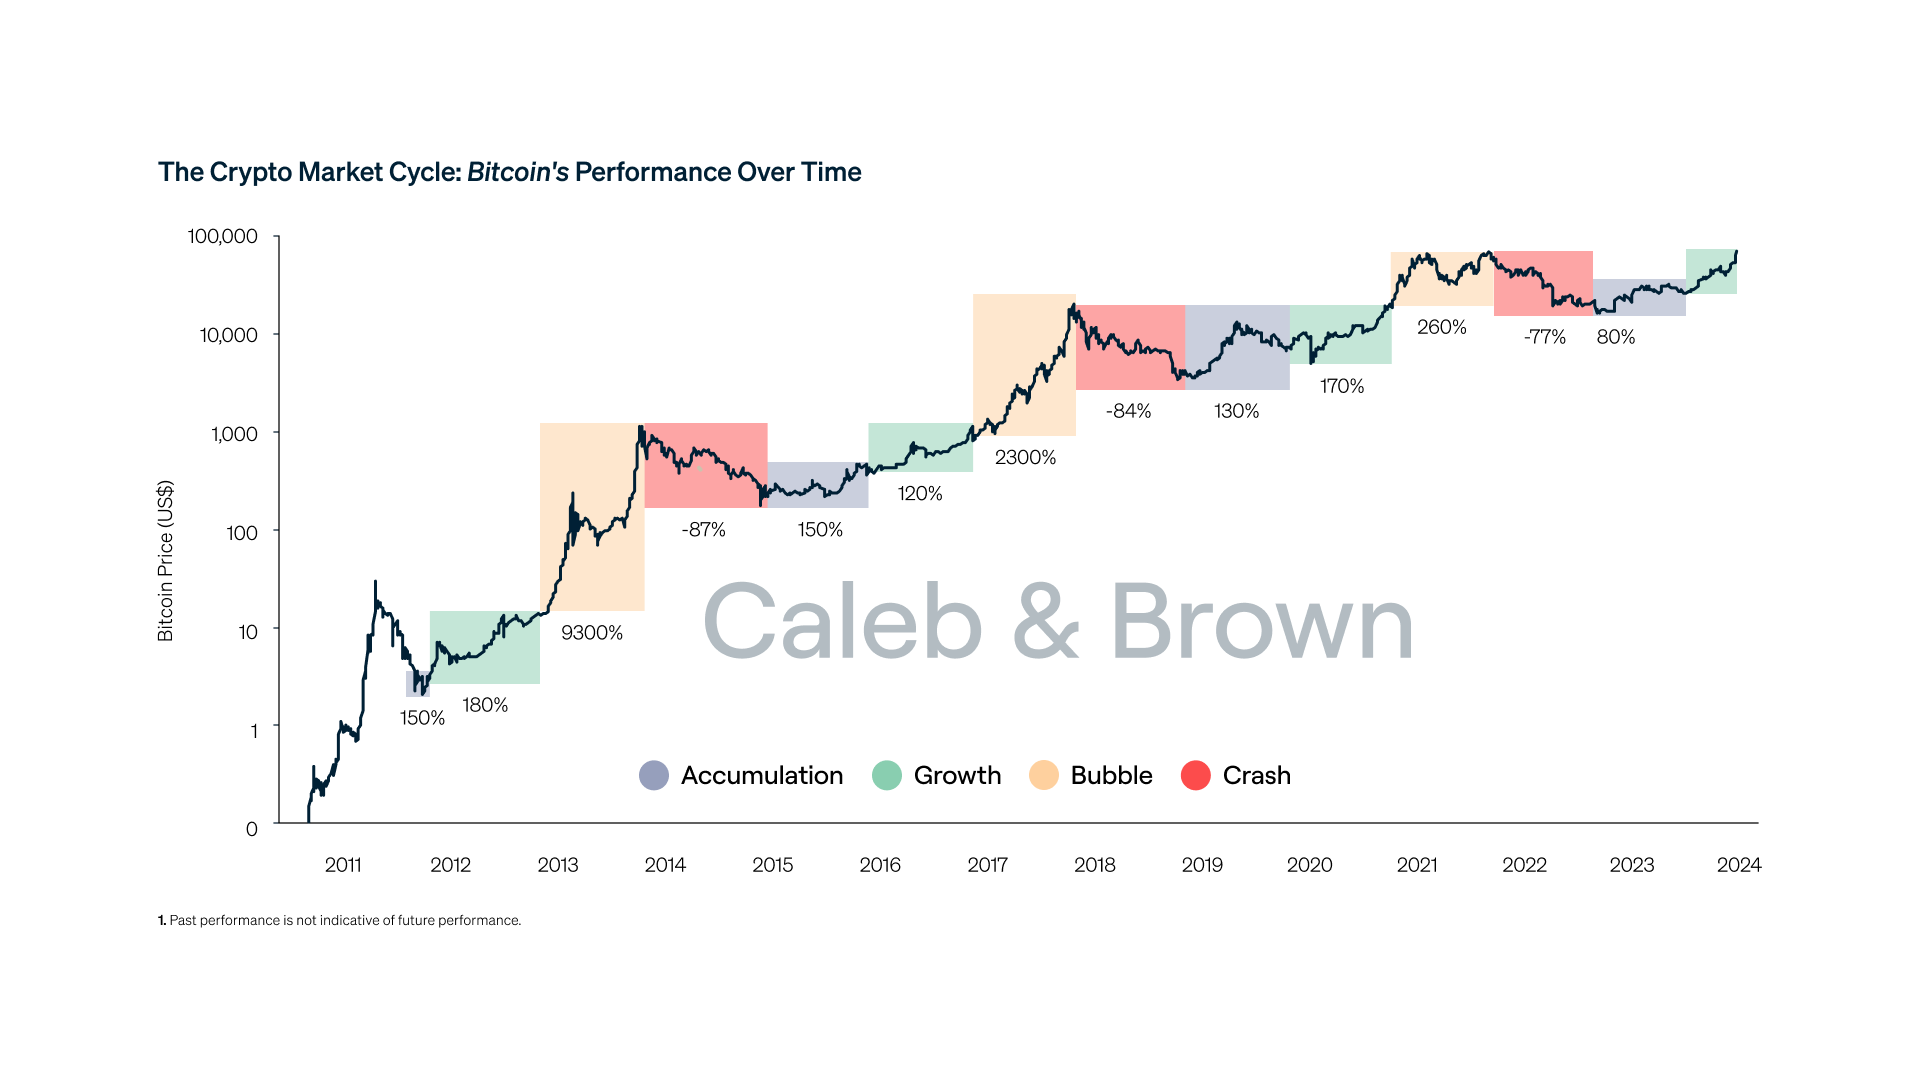 The Crypto Market Cycle: Bitcoin's Performance Over Time